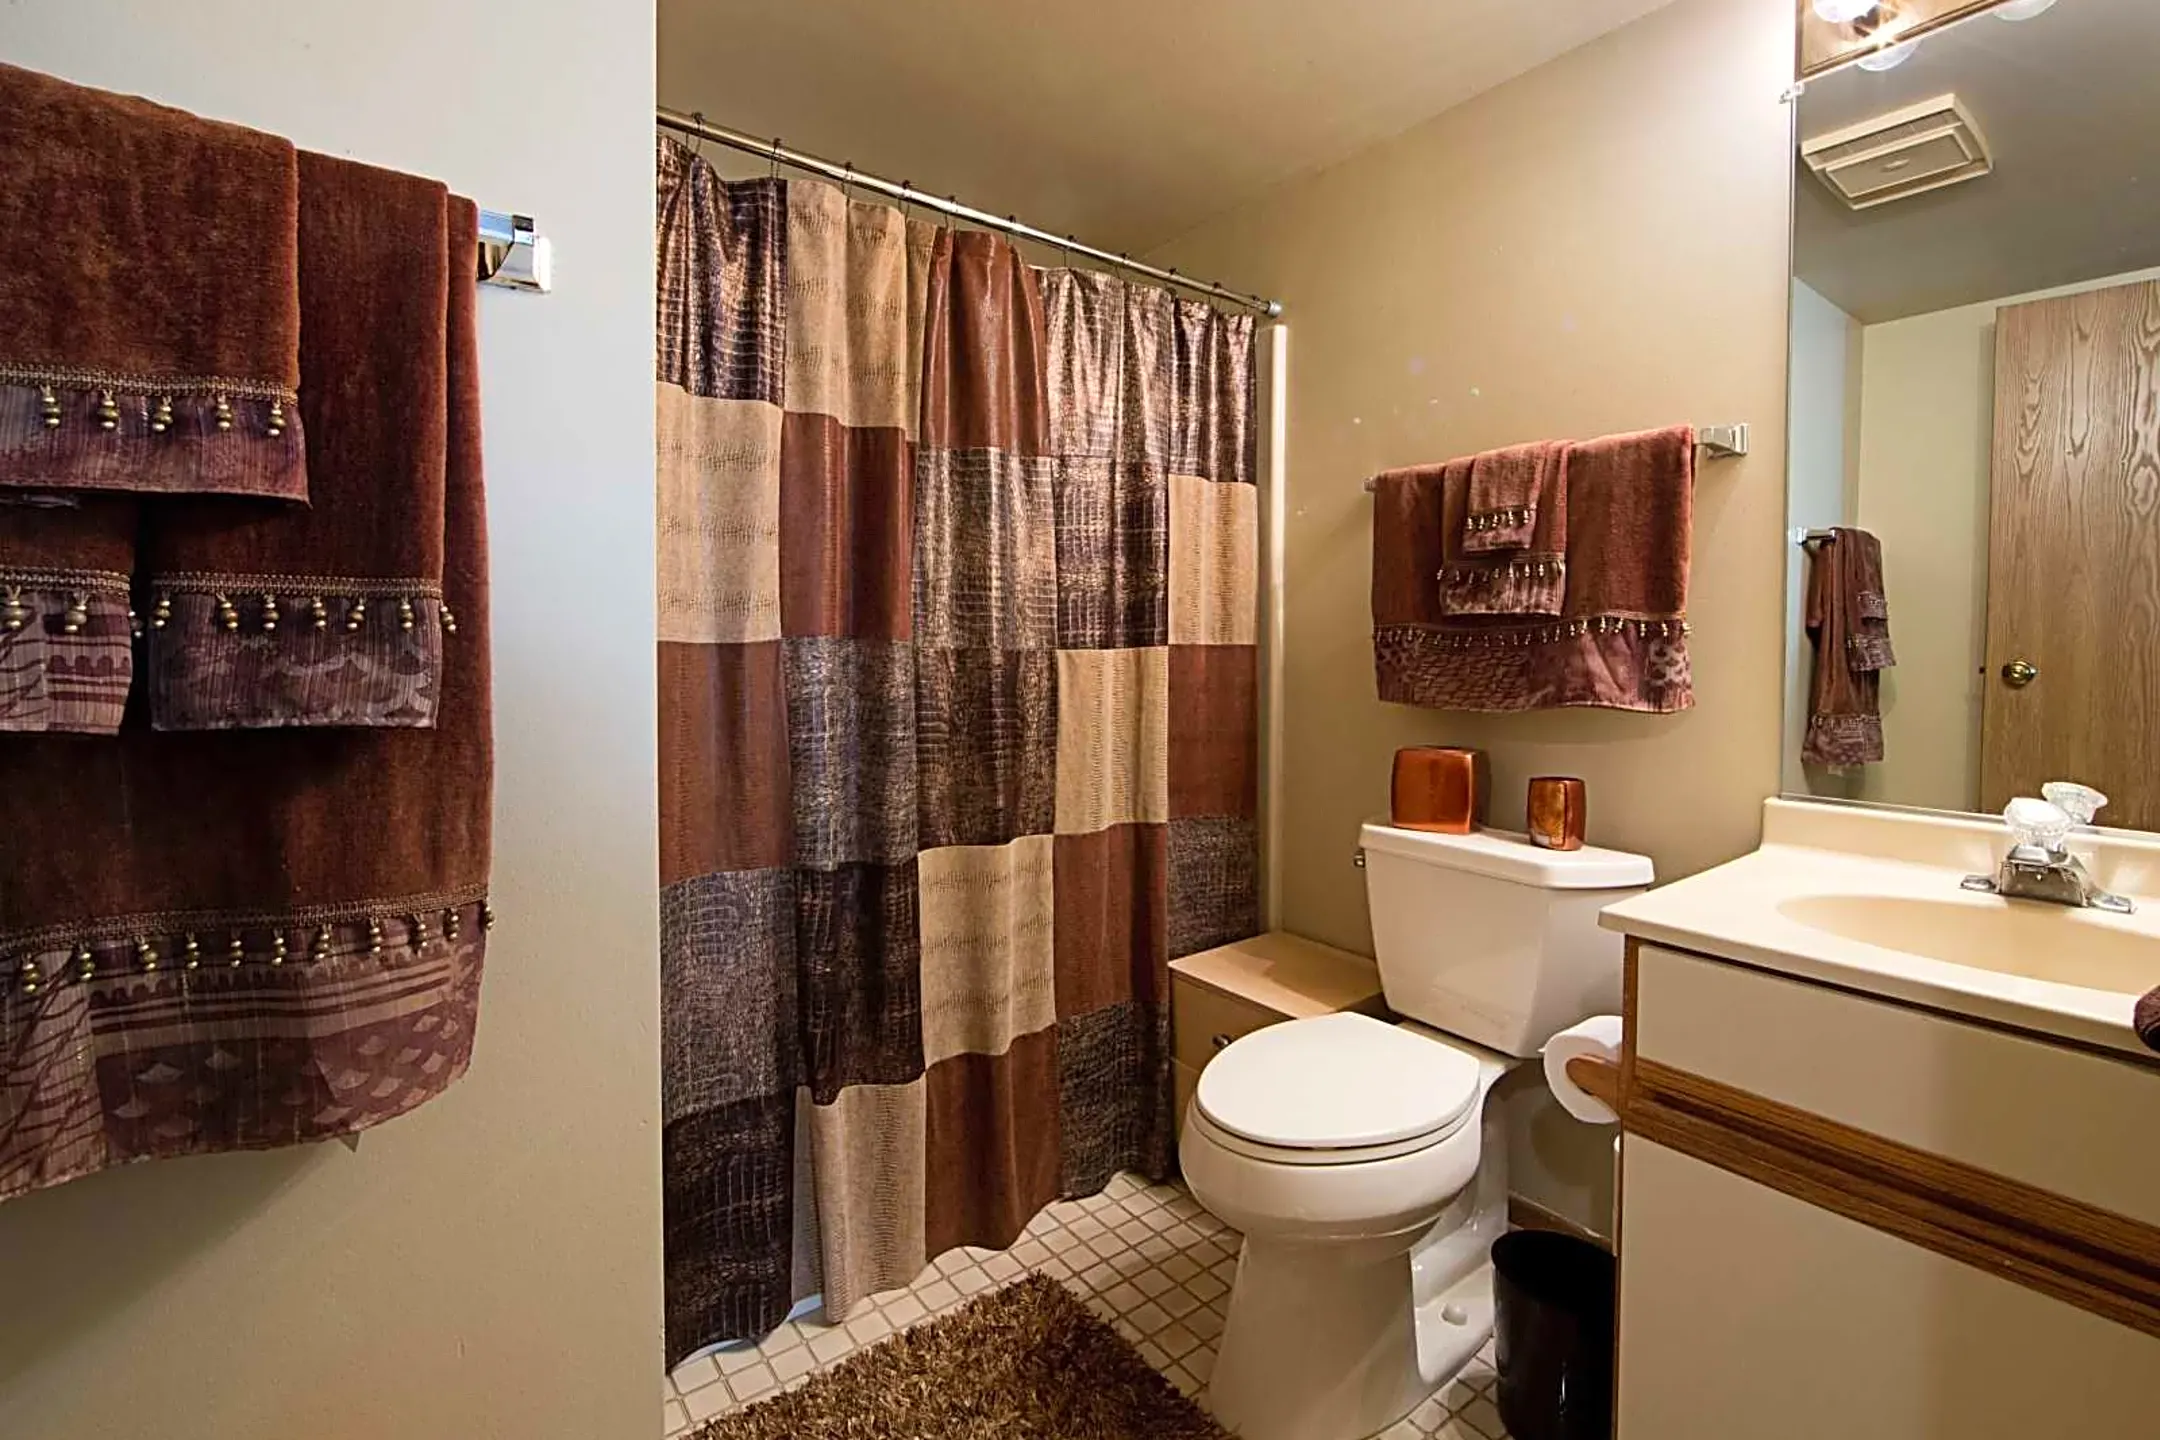 Steepleview Apartments - Itasca, IL